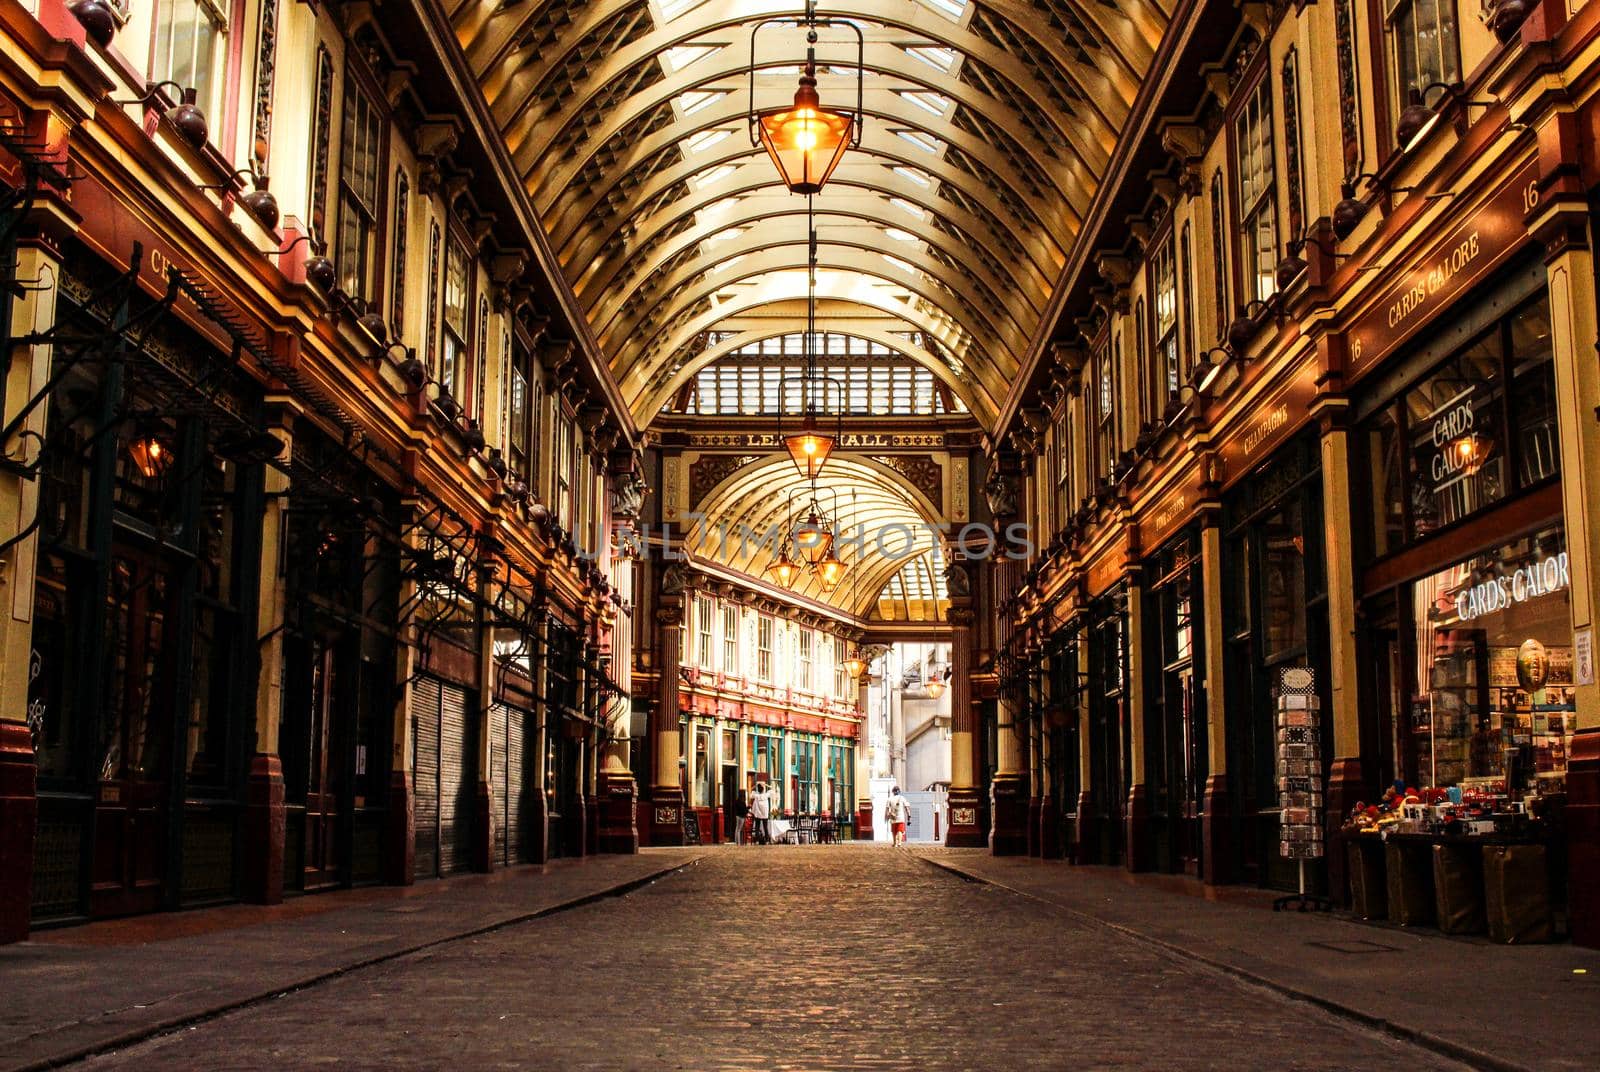 'Leadenhall market' and its' stores from ground view in the winter, central London, UK. by olifrenchphoto